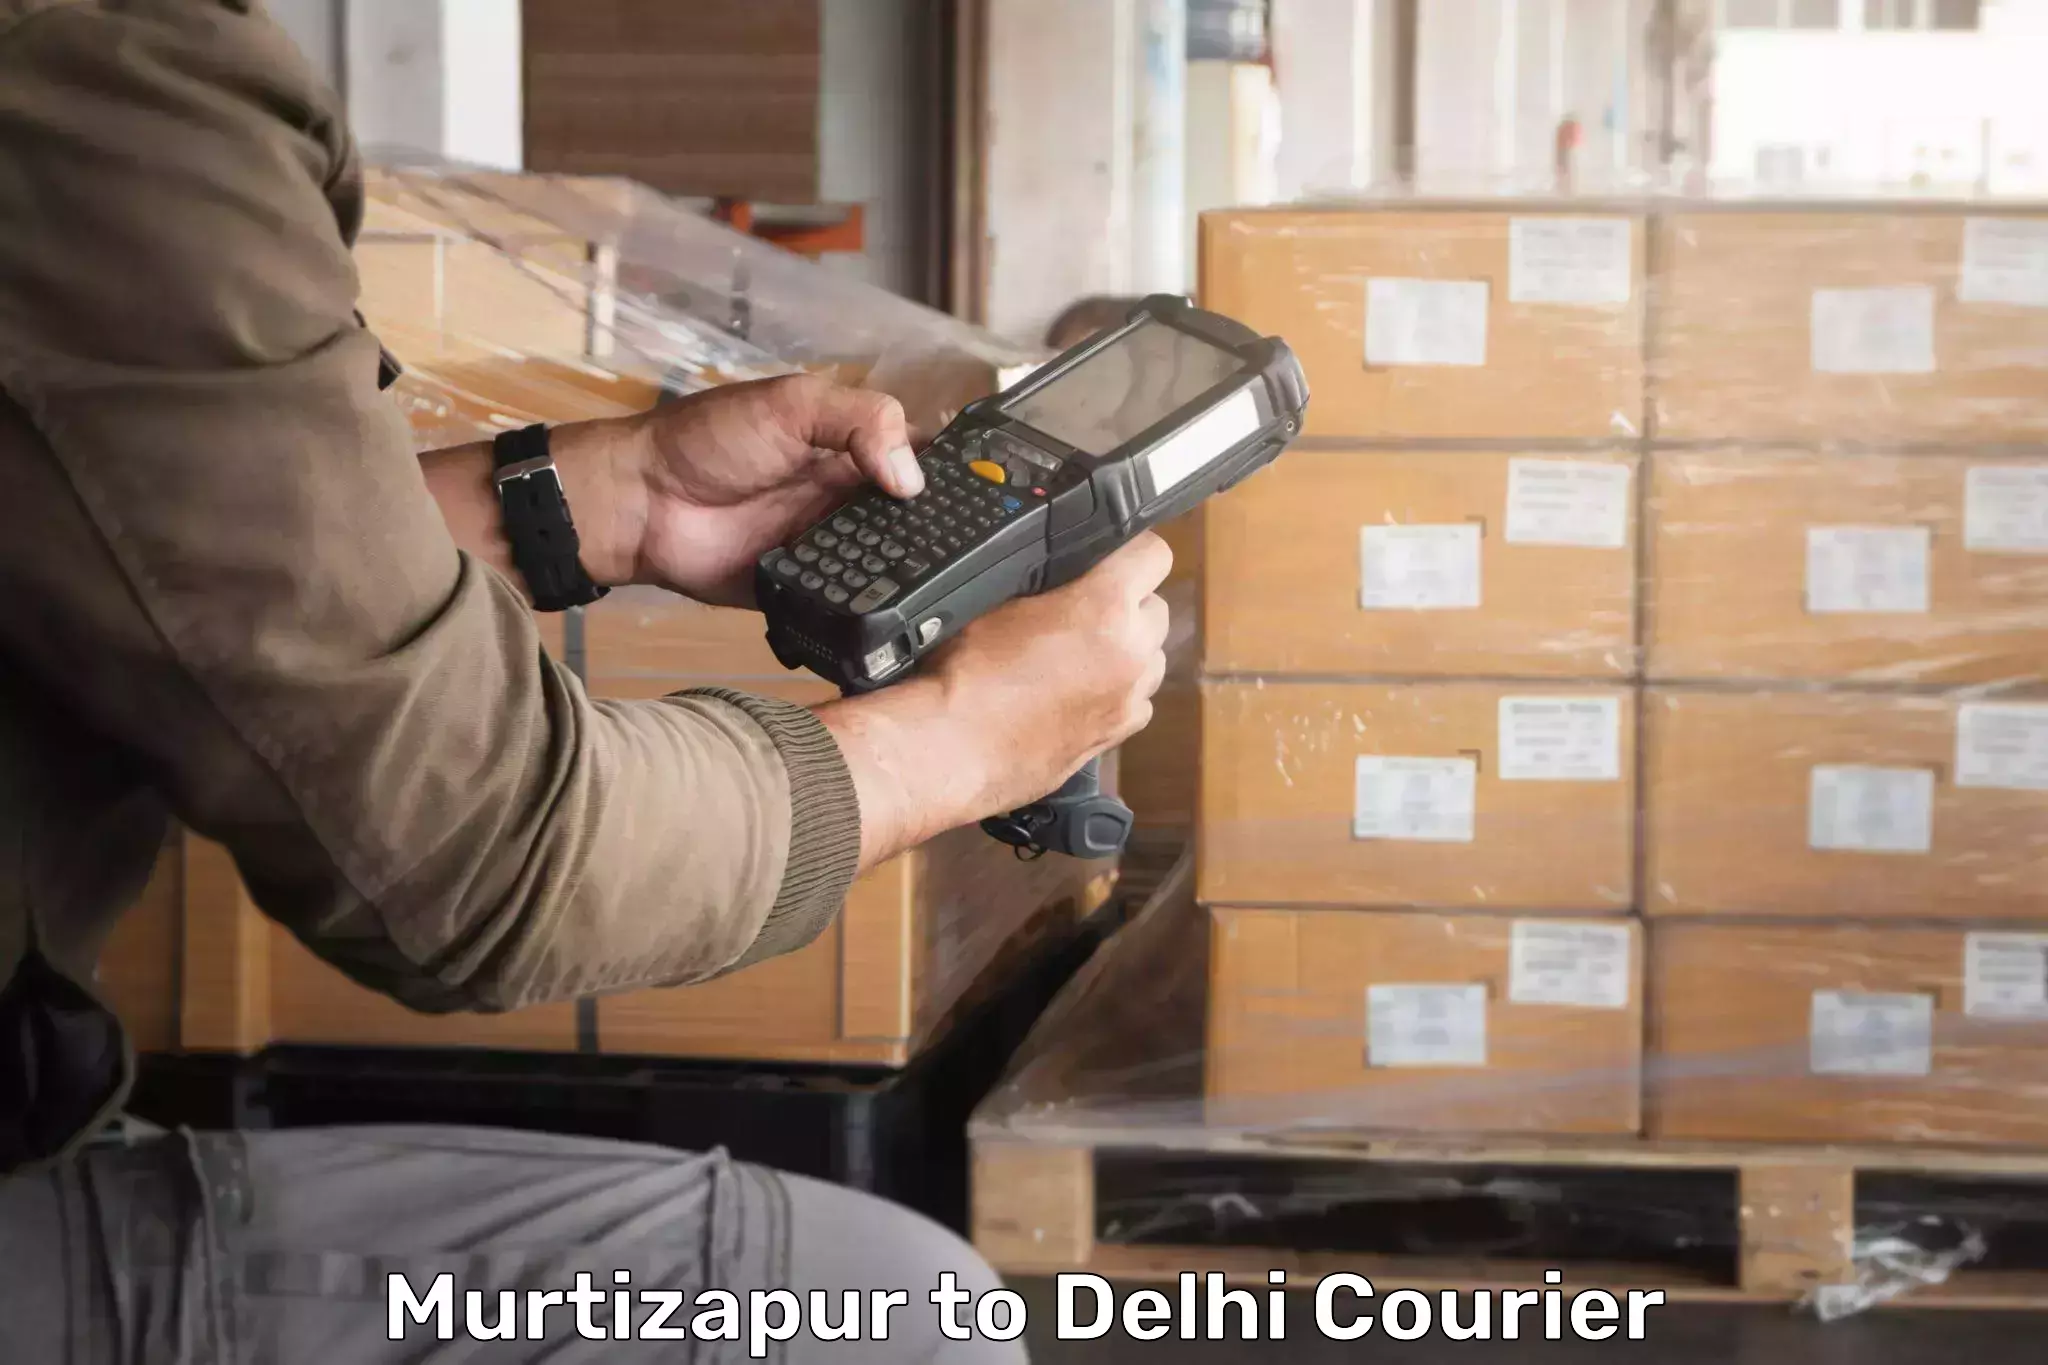 Global shipping networks Murtizapur to East Delhi